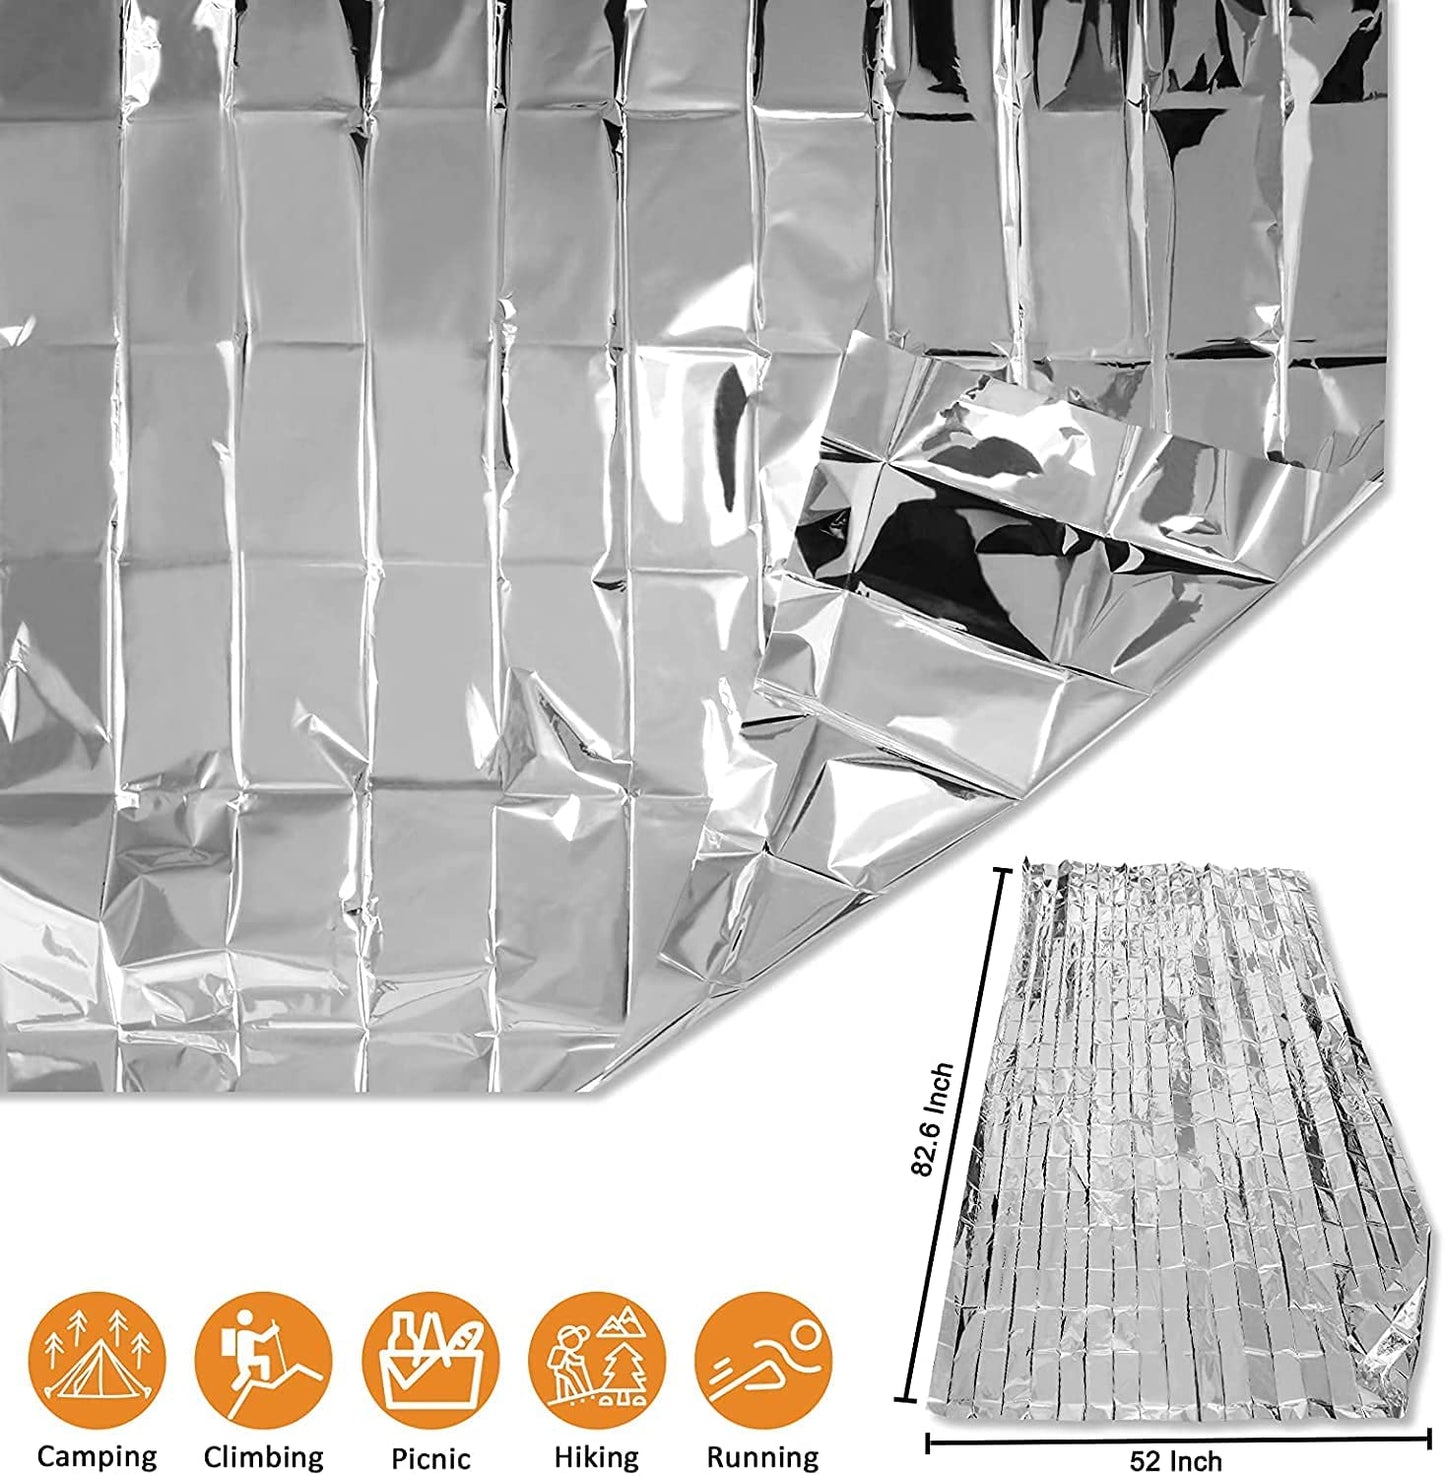 ANCwear Emergency Blankets 52"x82" for Outdoors,Hiking,Survival or First Aid